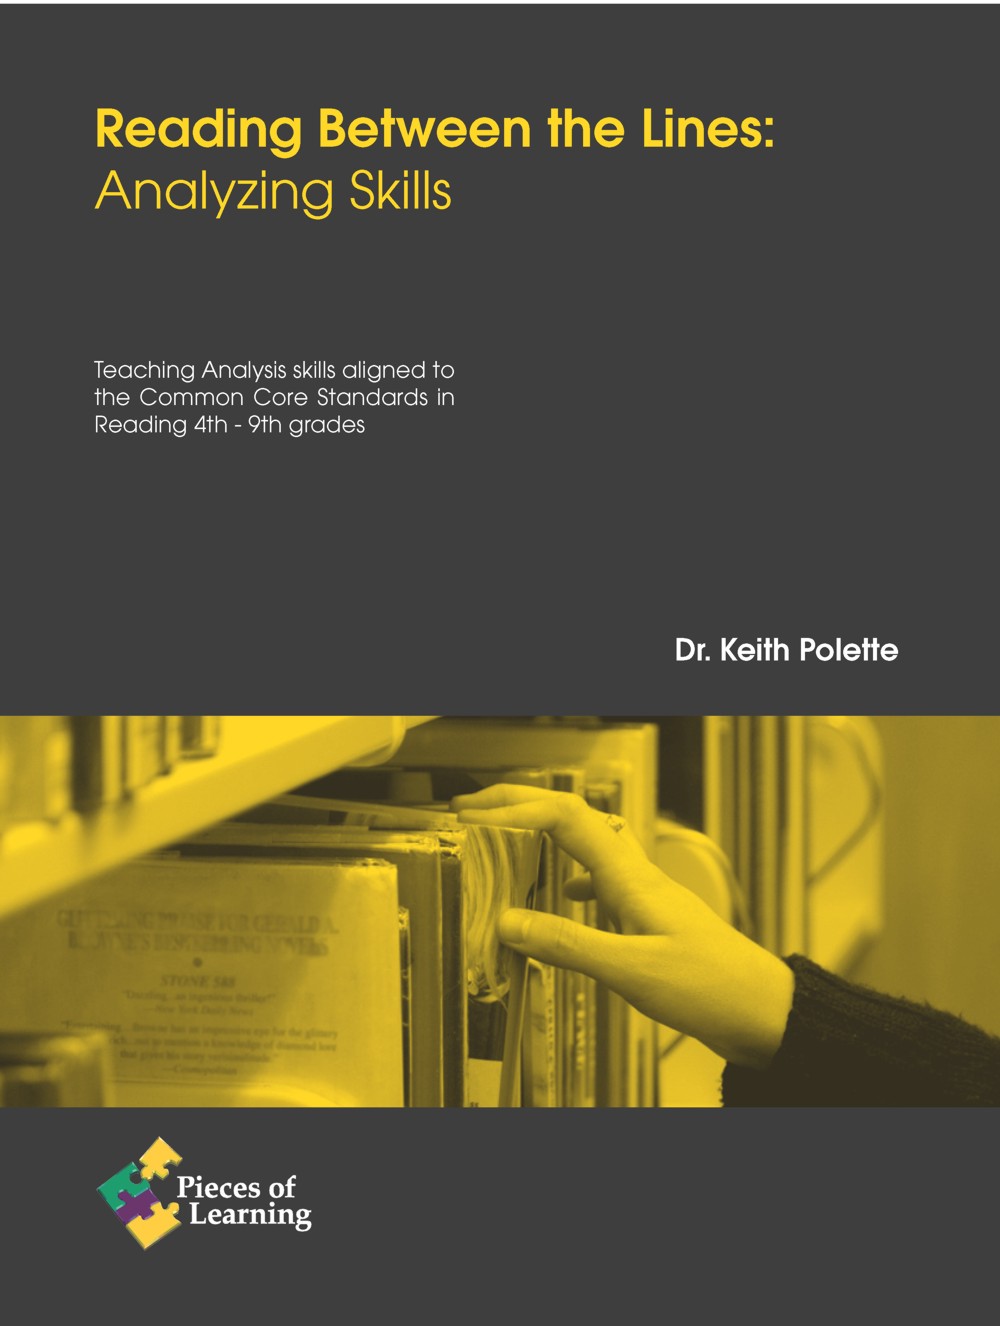 Reading Between the Lines: Analyzing Skills